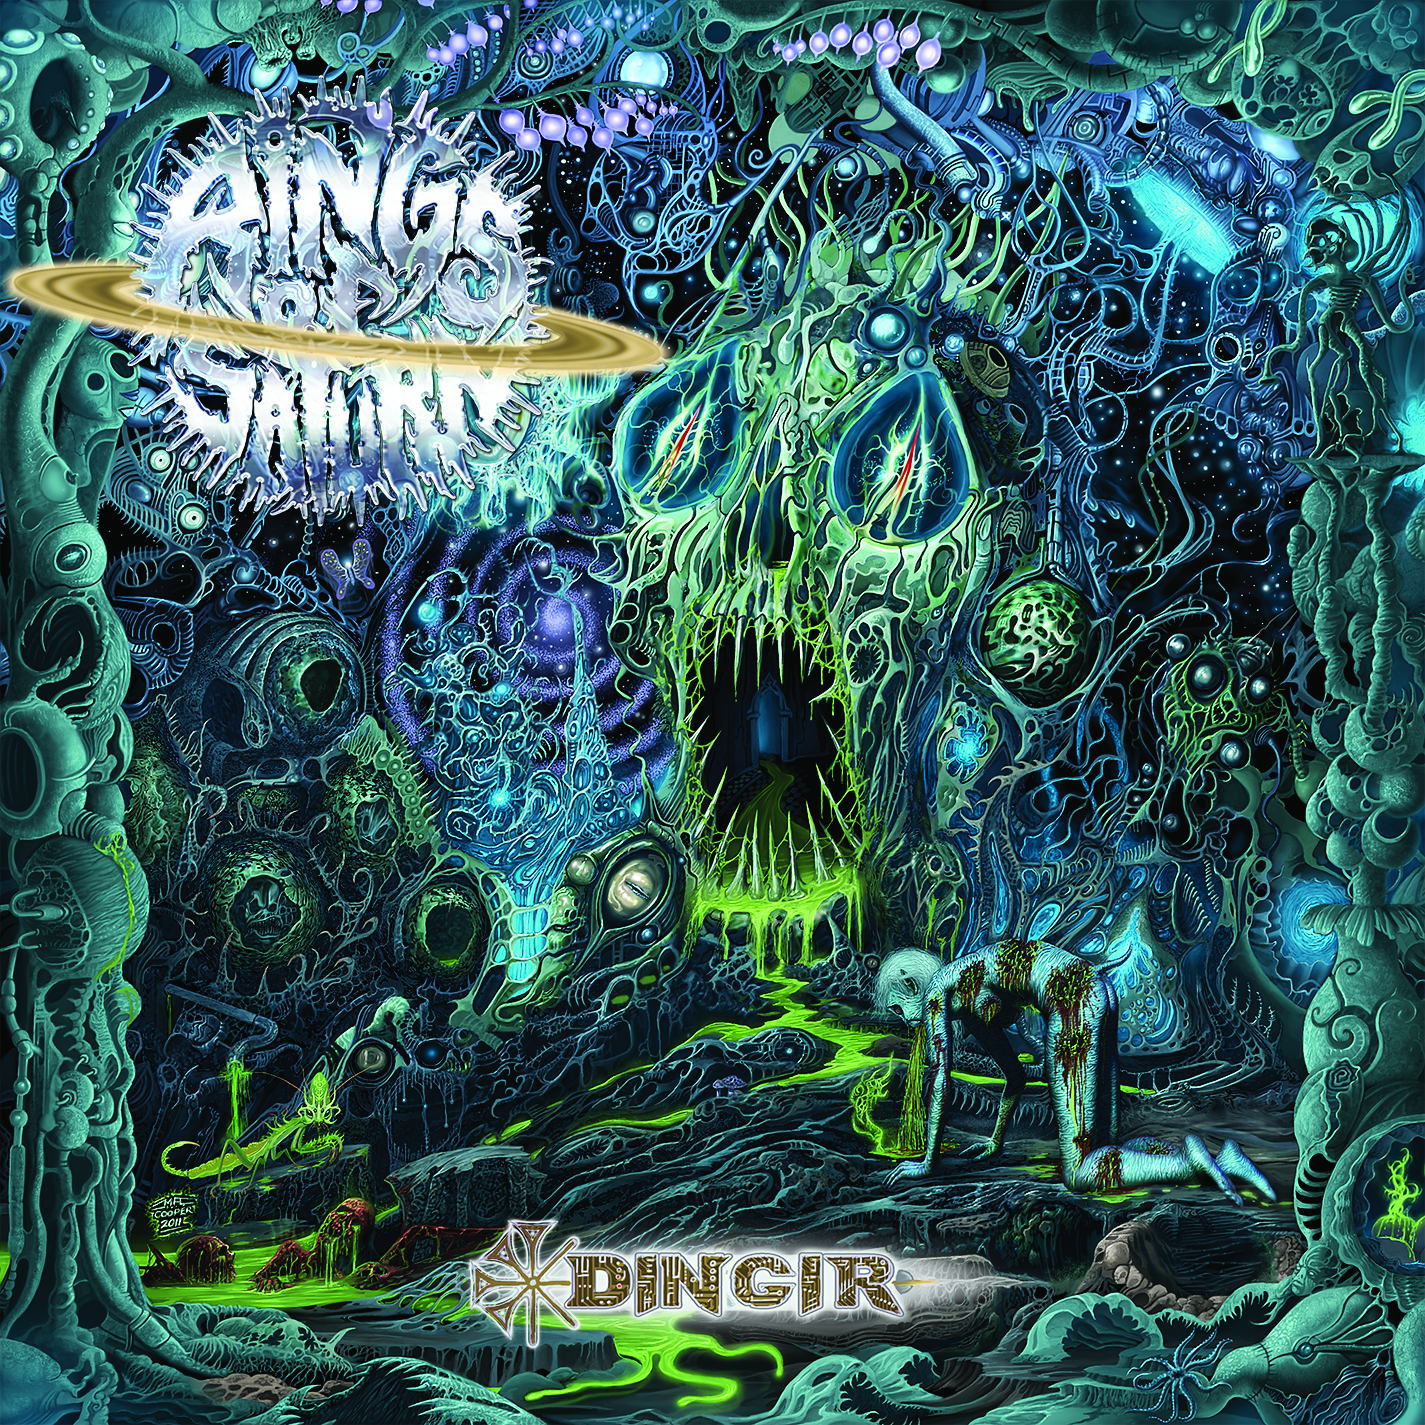 Rings Of Saturn Backgrounds, Compatible - PC, Mobile, Gadgets| 1425x1425 px